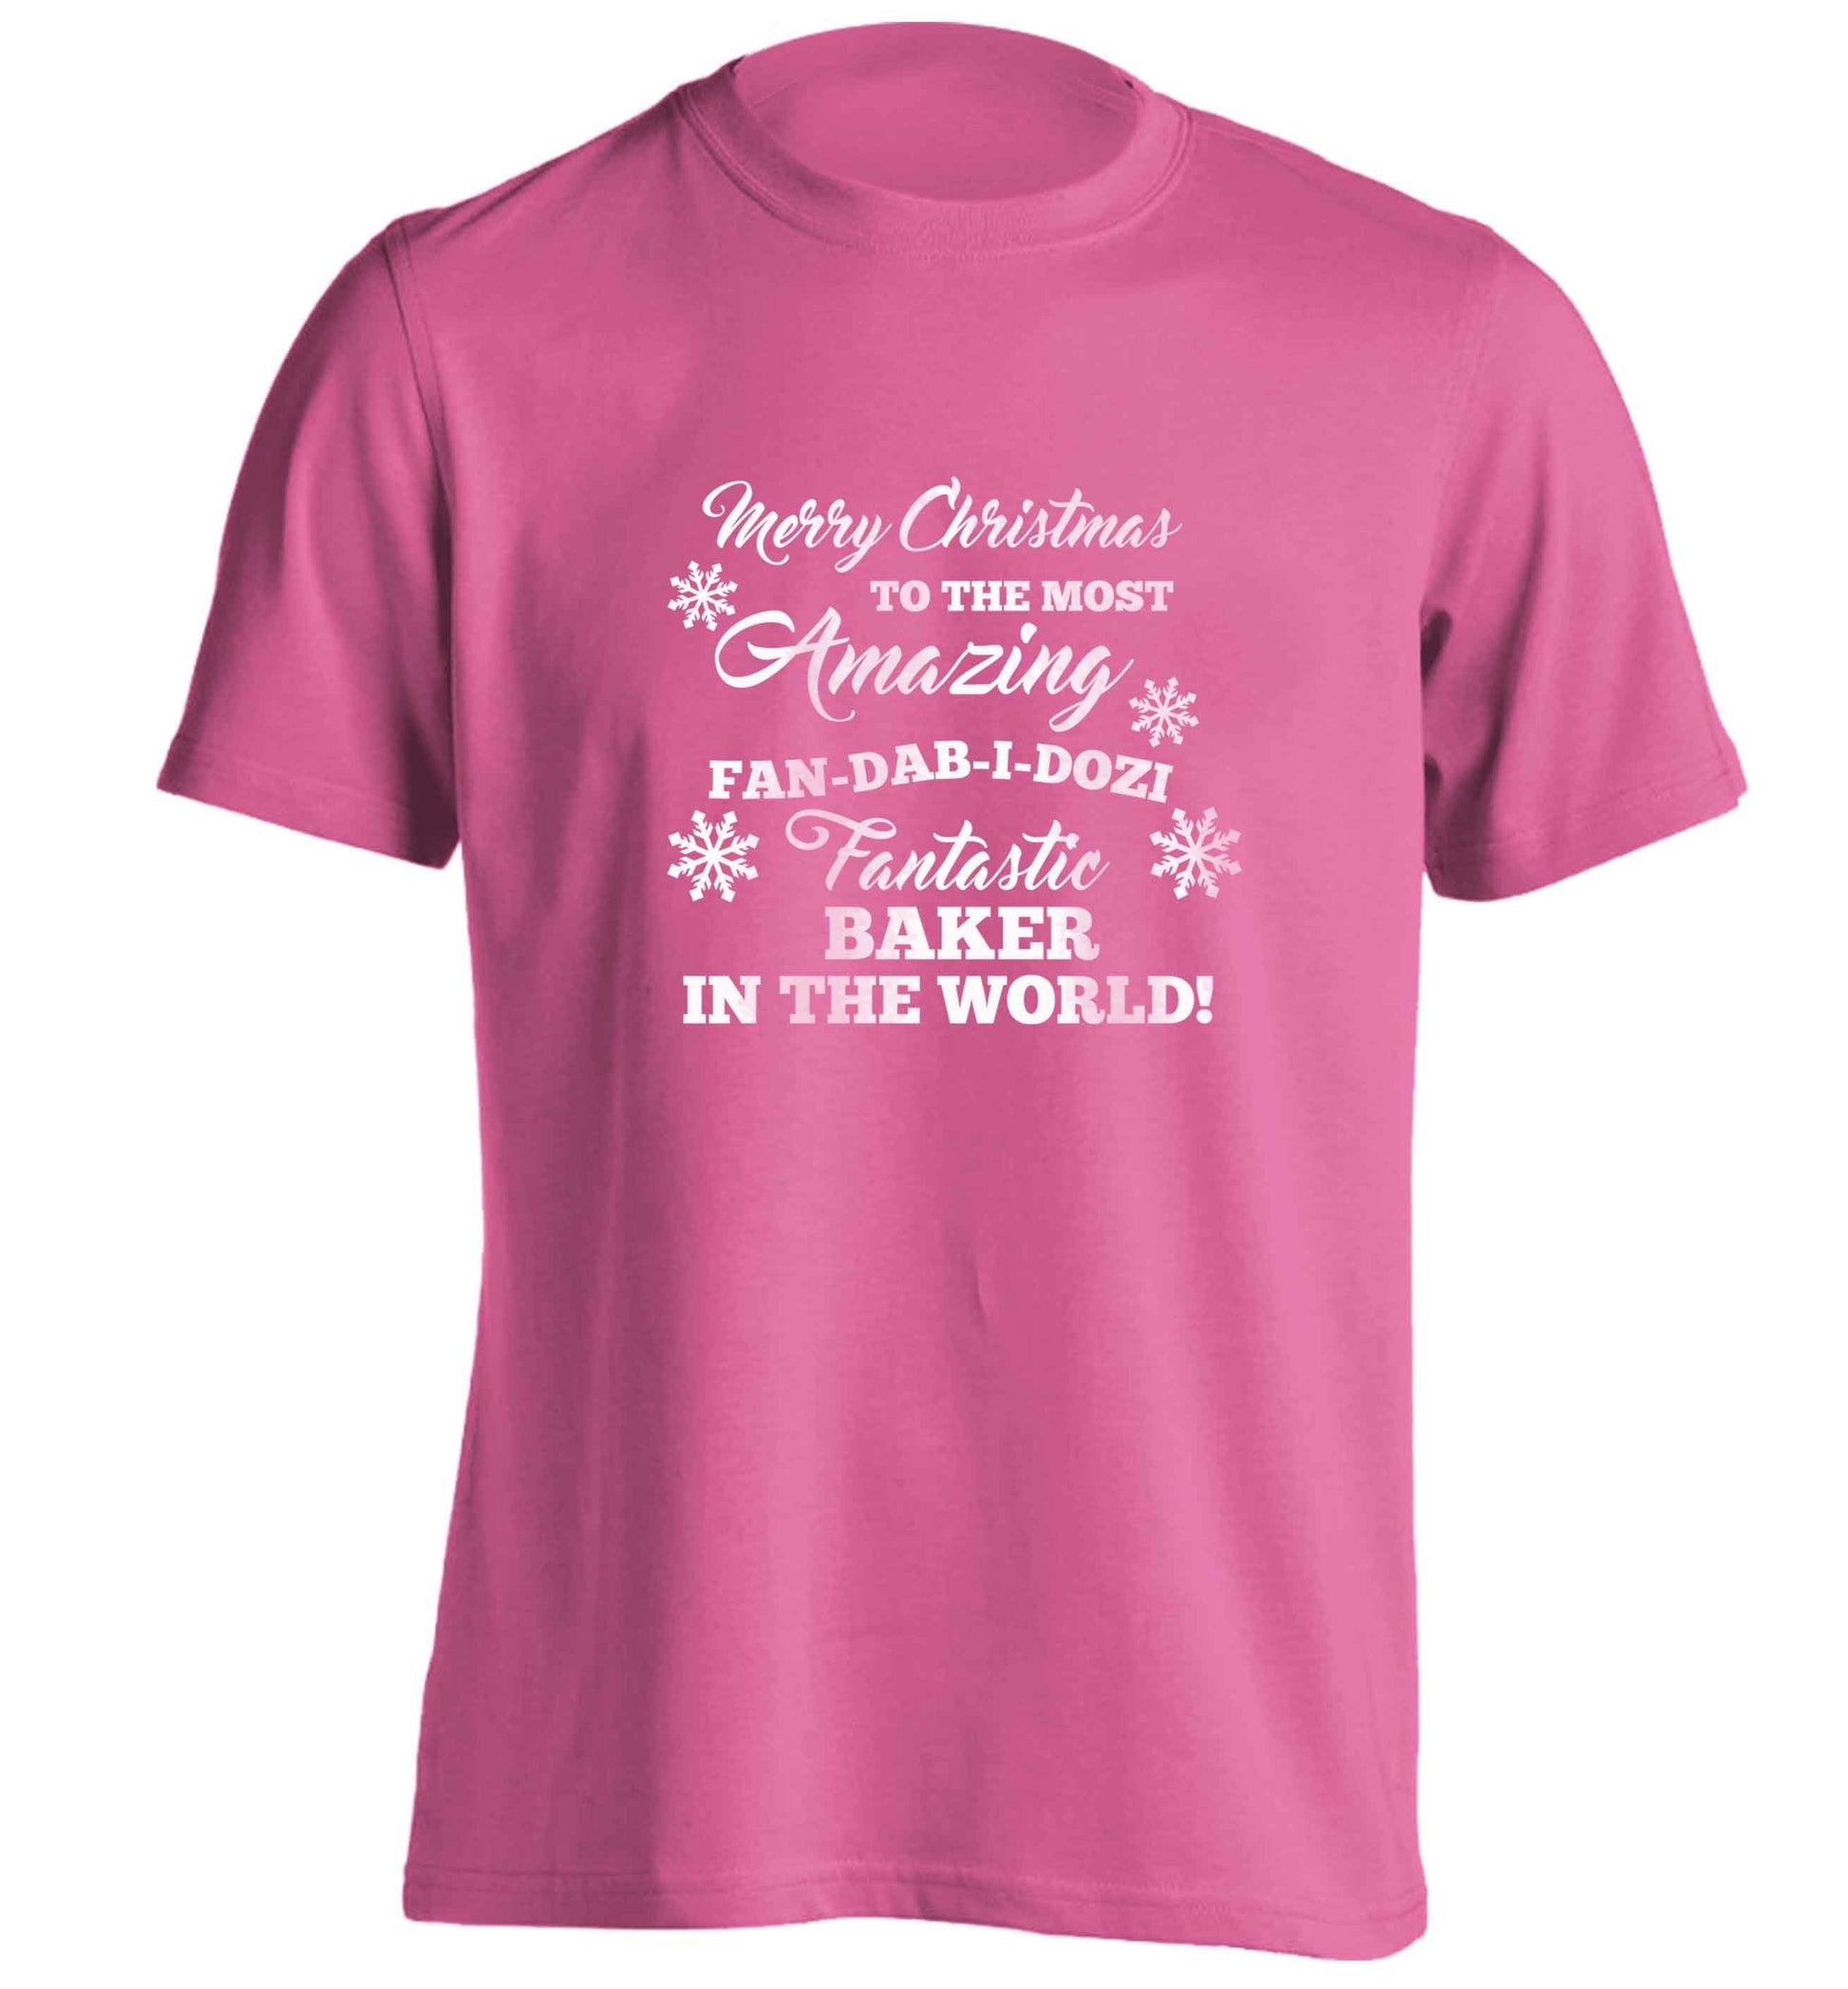 Merry Christmas to the most amazing baker in the world! adults unisex pink Tshirt 2XL